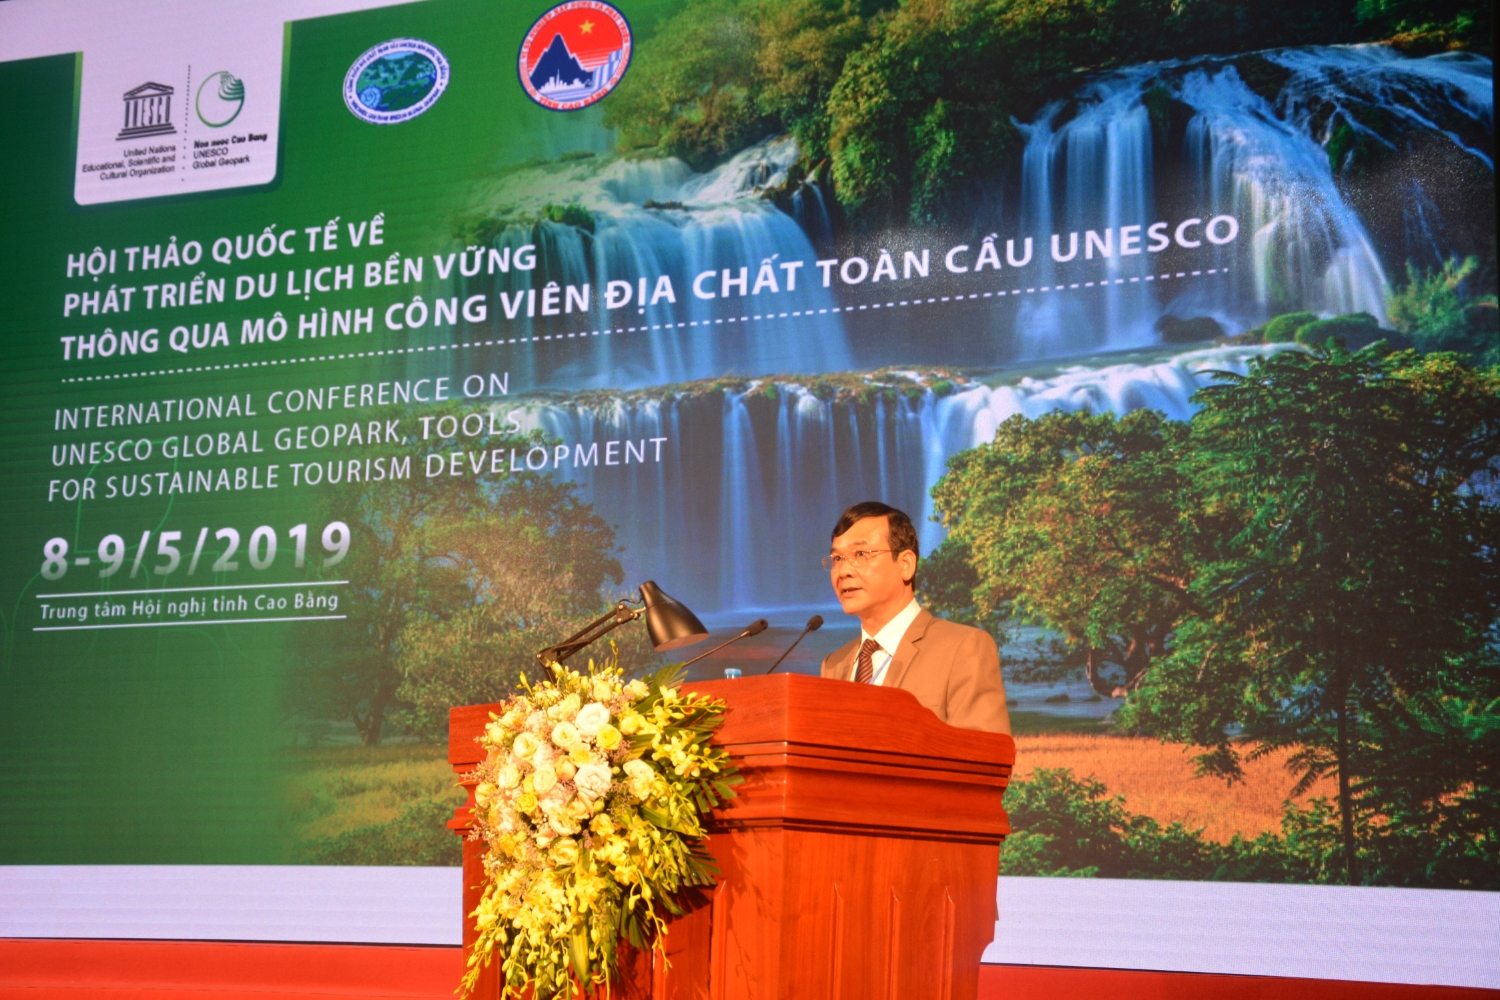 Cao Bang province organized the Interntaional conference on “Sustainable tourism development through UNESCO global geopark model.